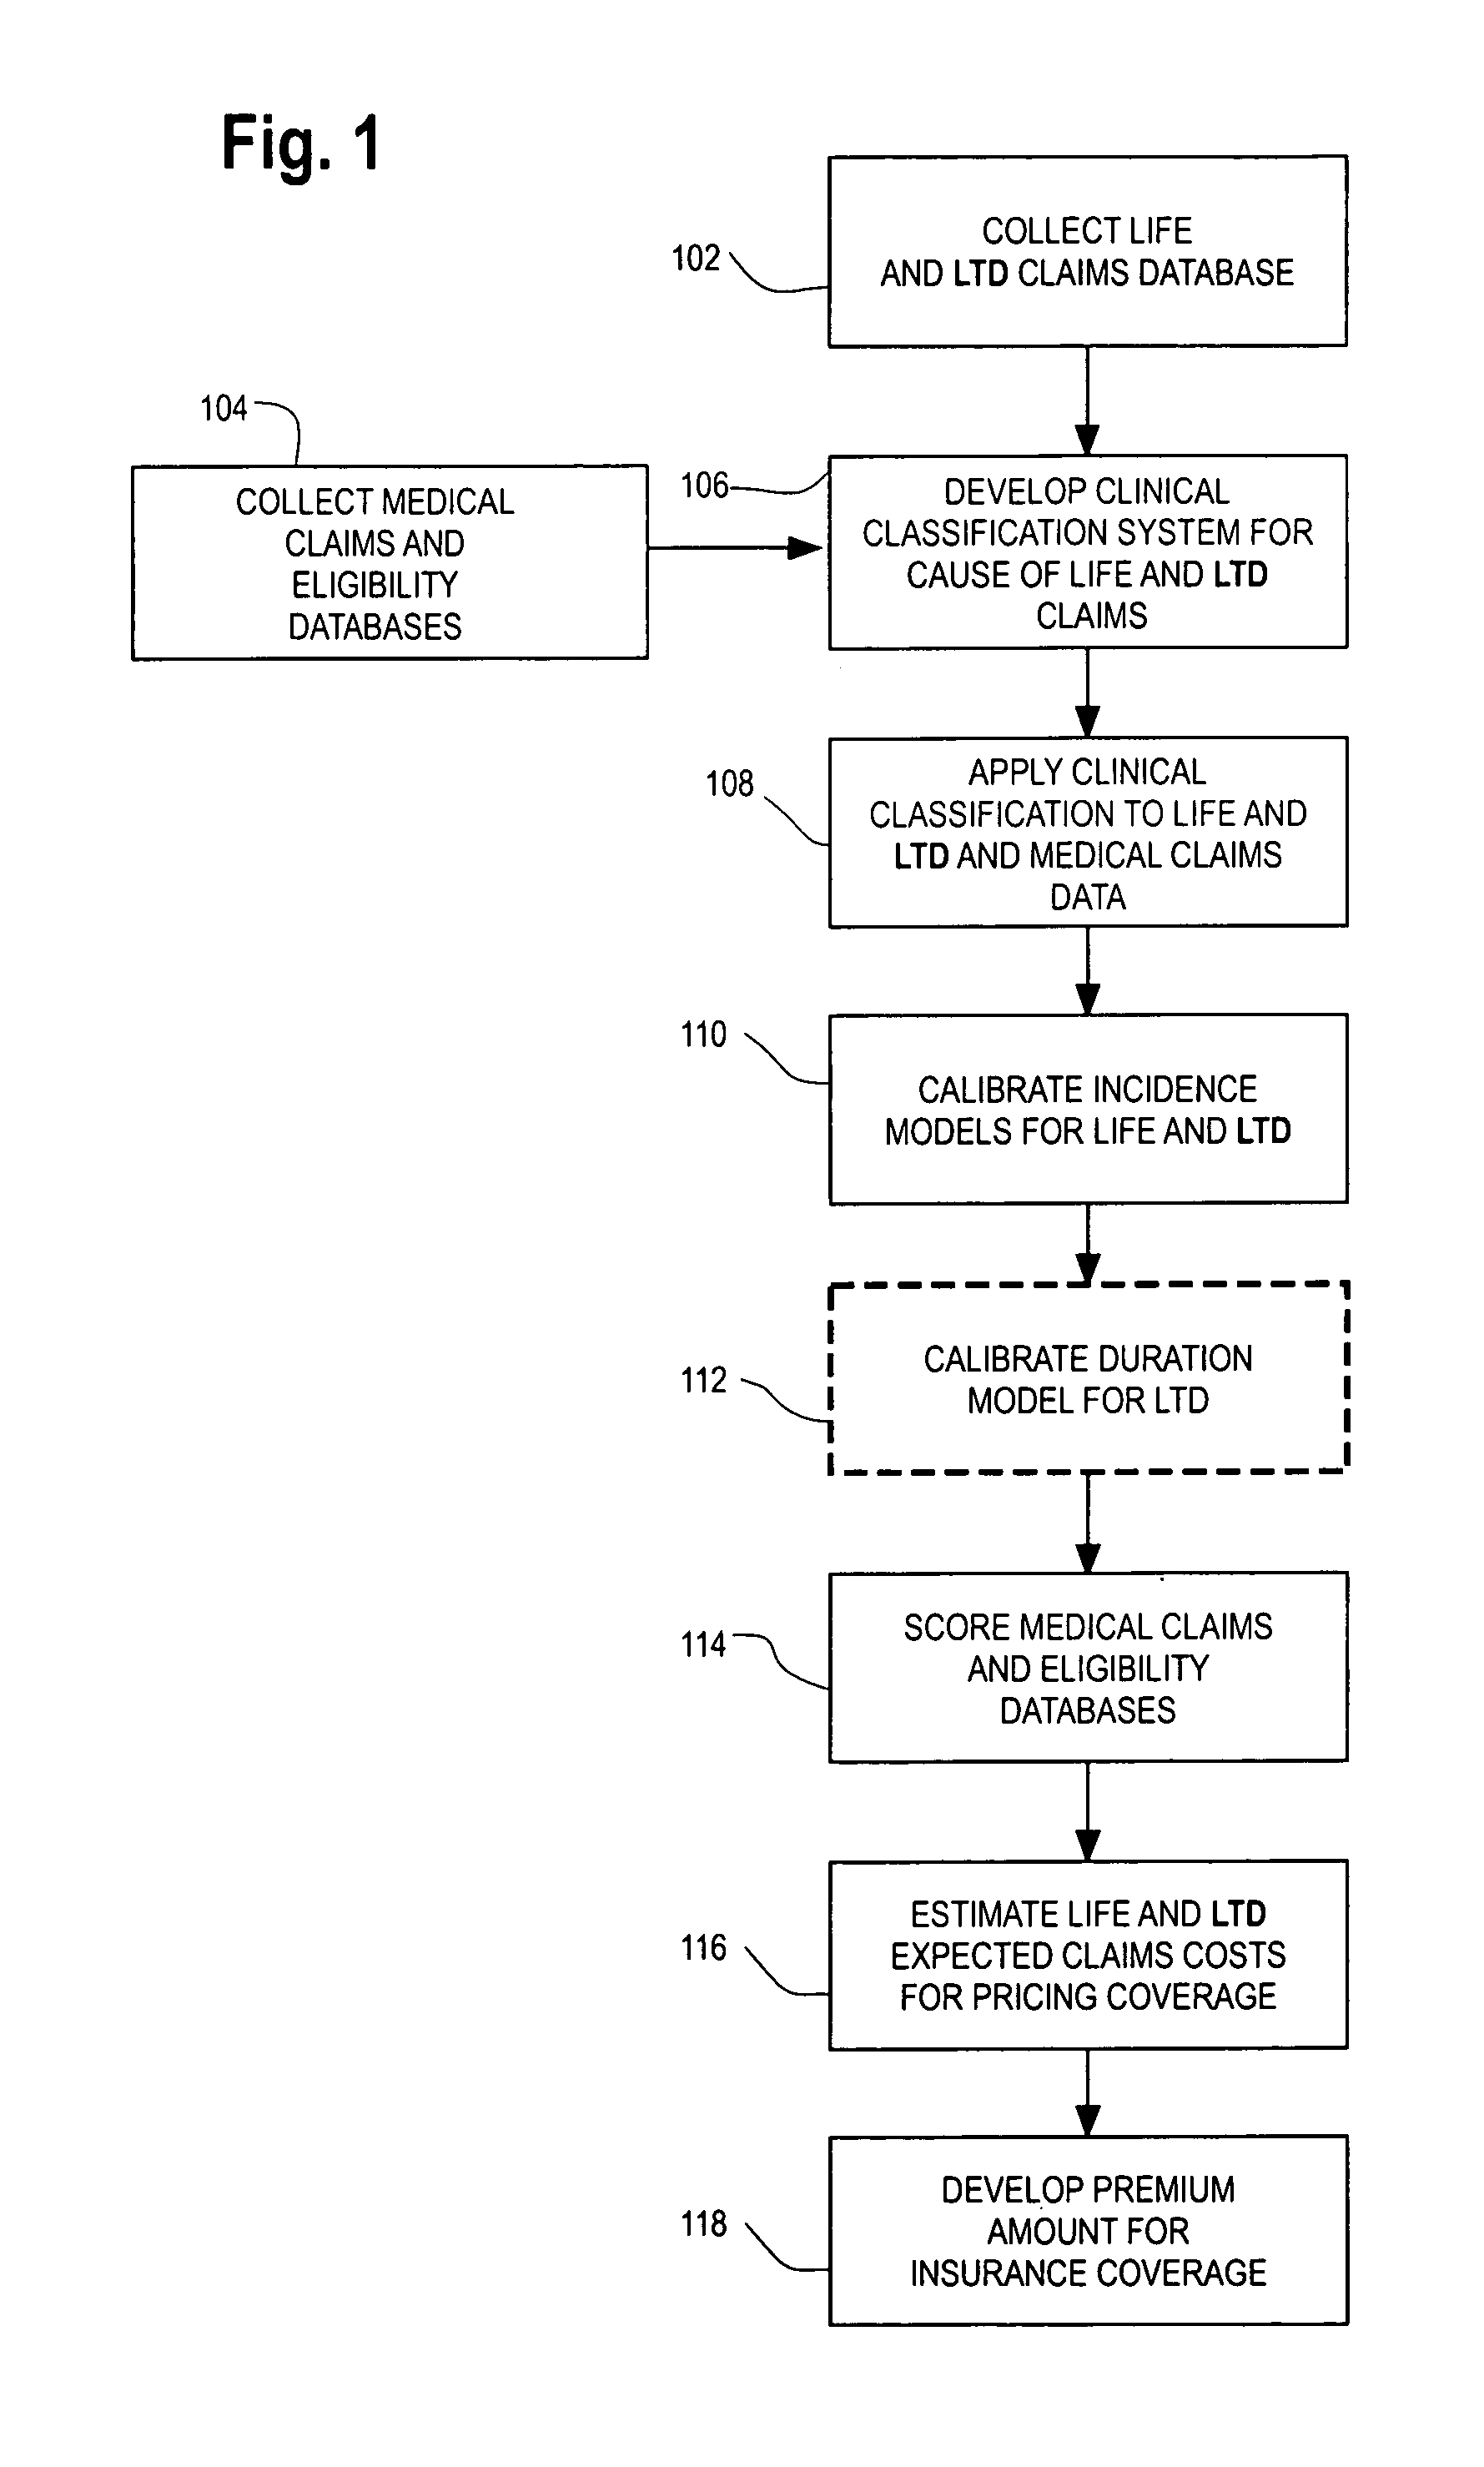 Computerized medical underwriting of group life and disability insurance using medical claims data